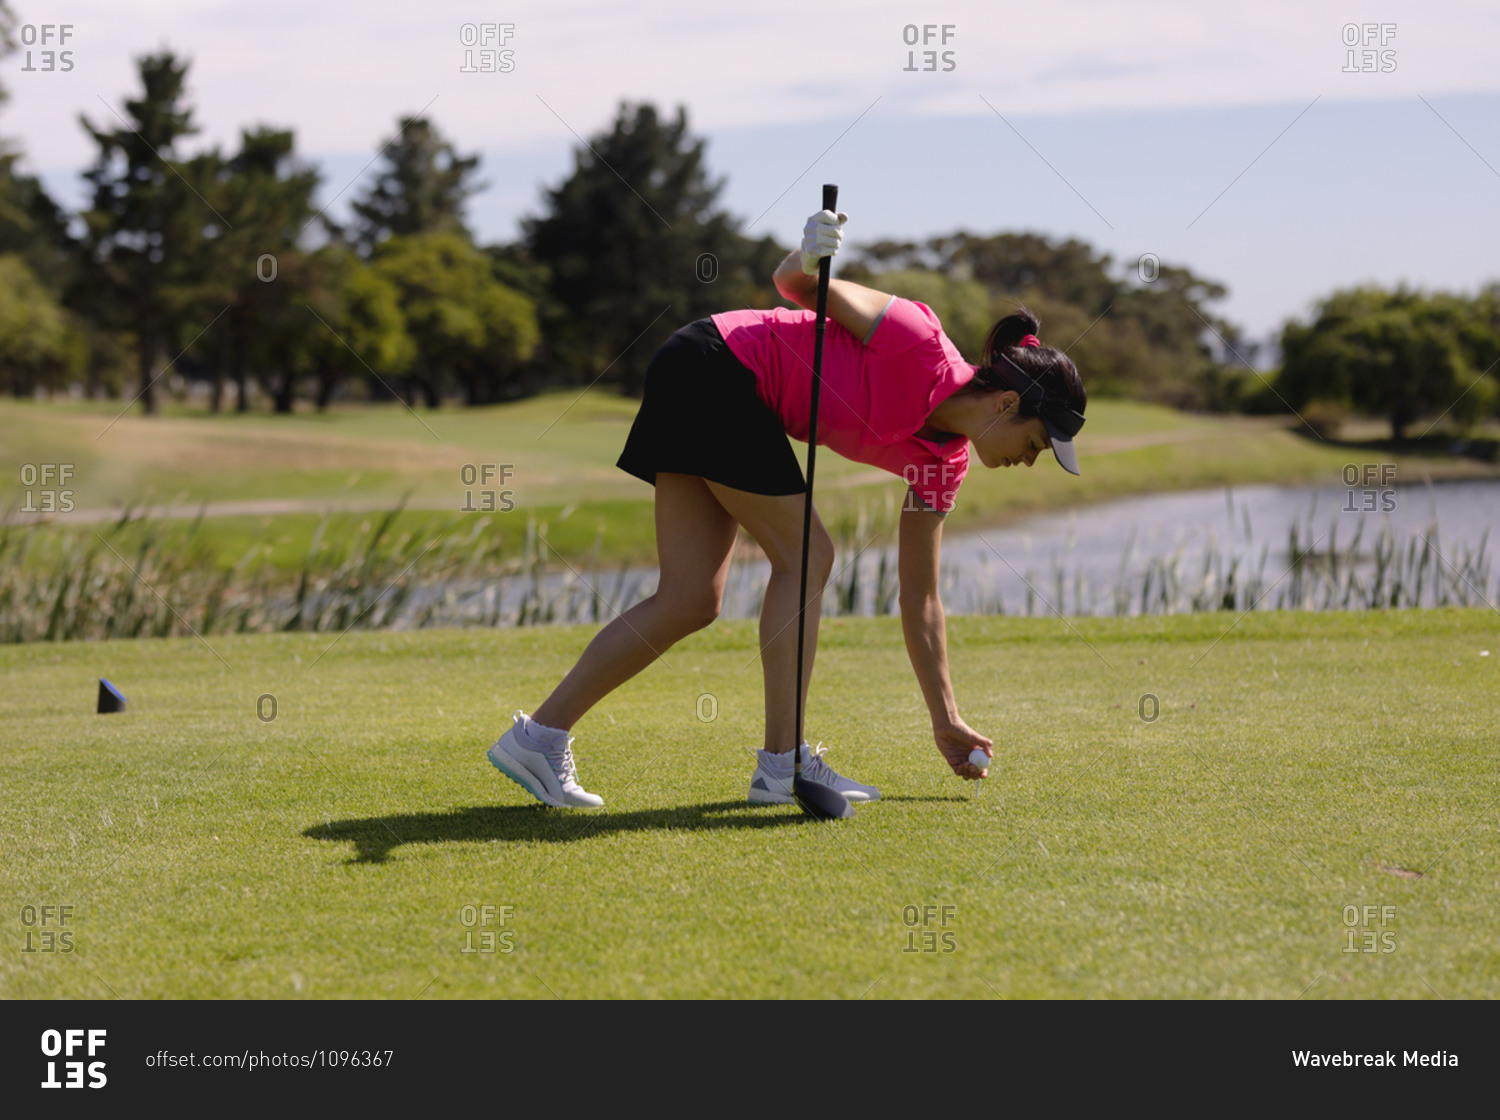 Caucasian woman playing golf leaning to place ball before taking a shot. sport leisure hobbies golf healthy outdoor lifestyle.